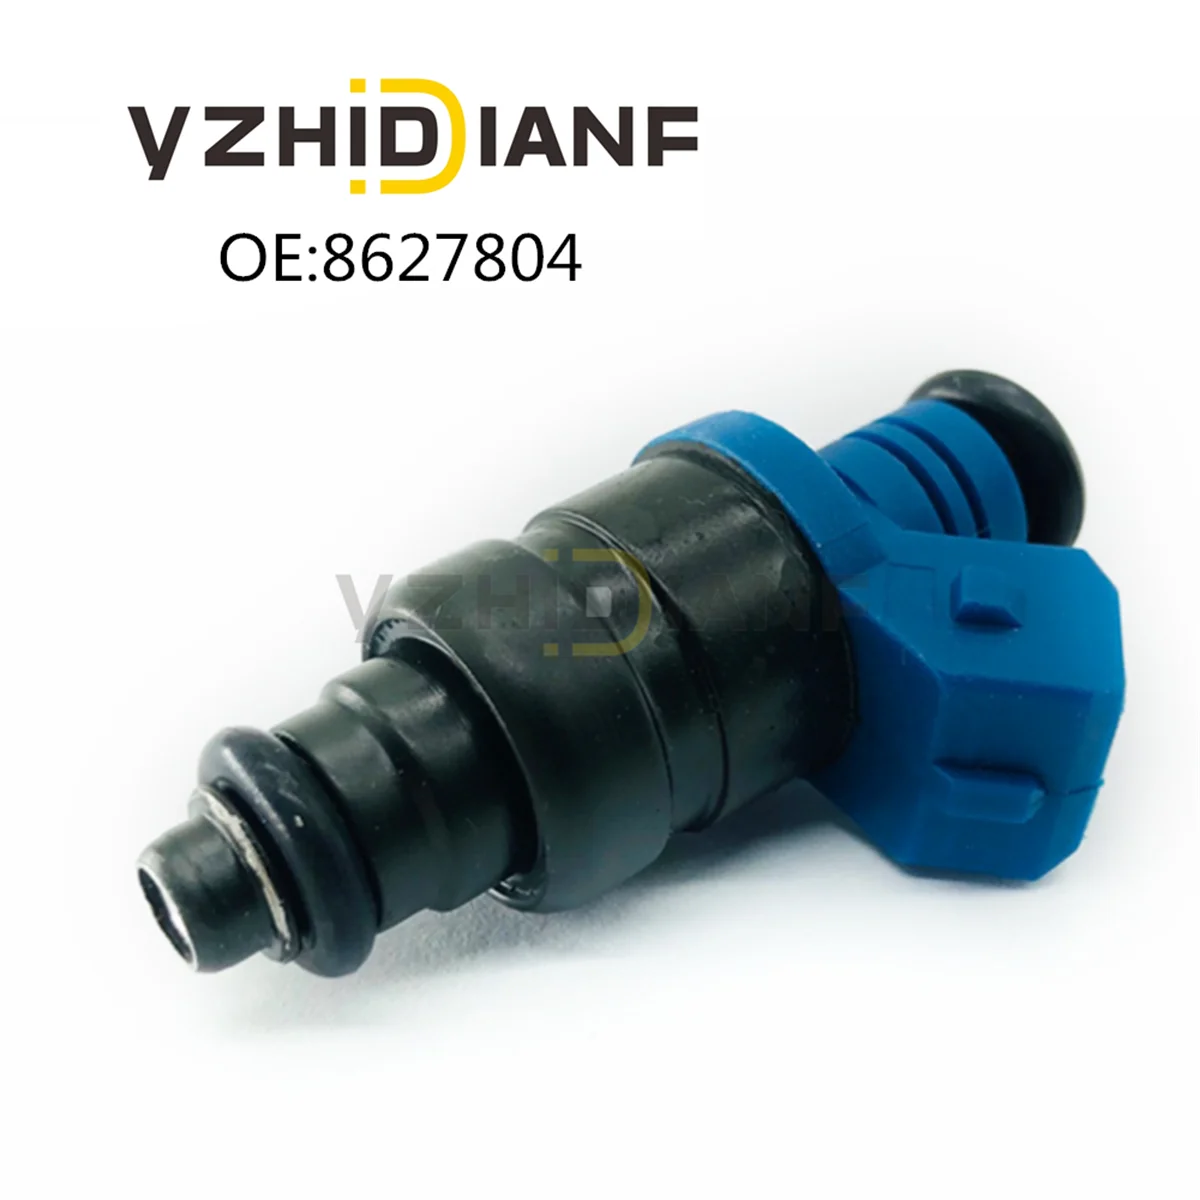 1x Car Fuel Injector Nozzle 8627804 96253573 For Volvo S40 V40 Automobiles High Quality Fuel Supply System